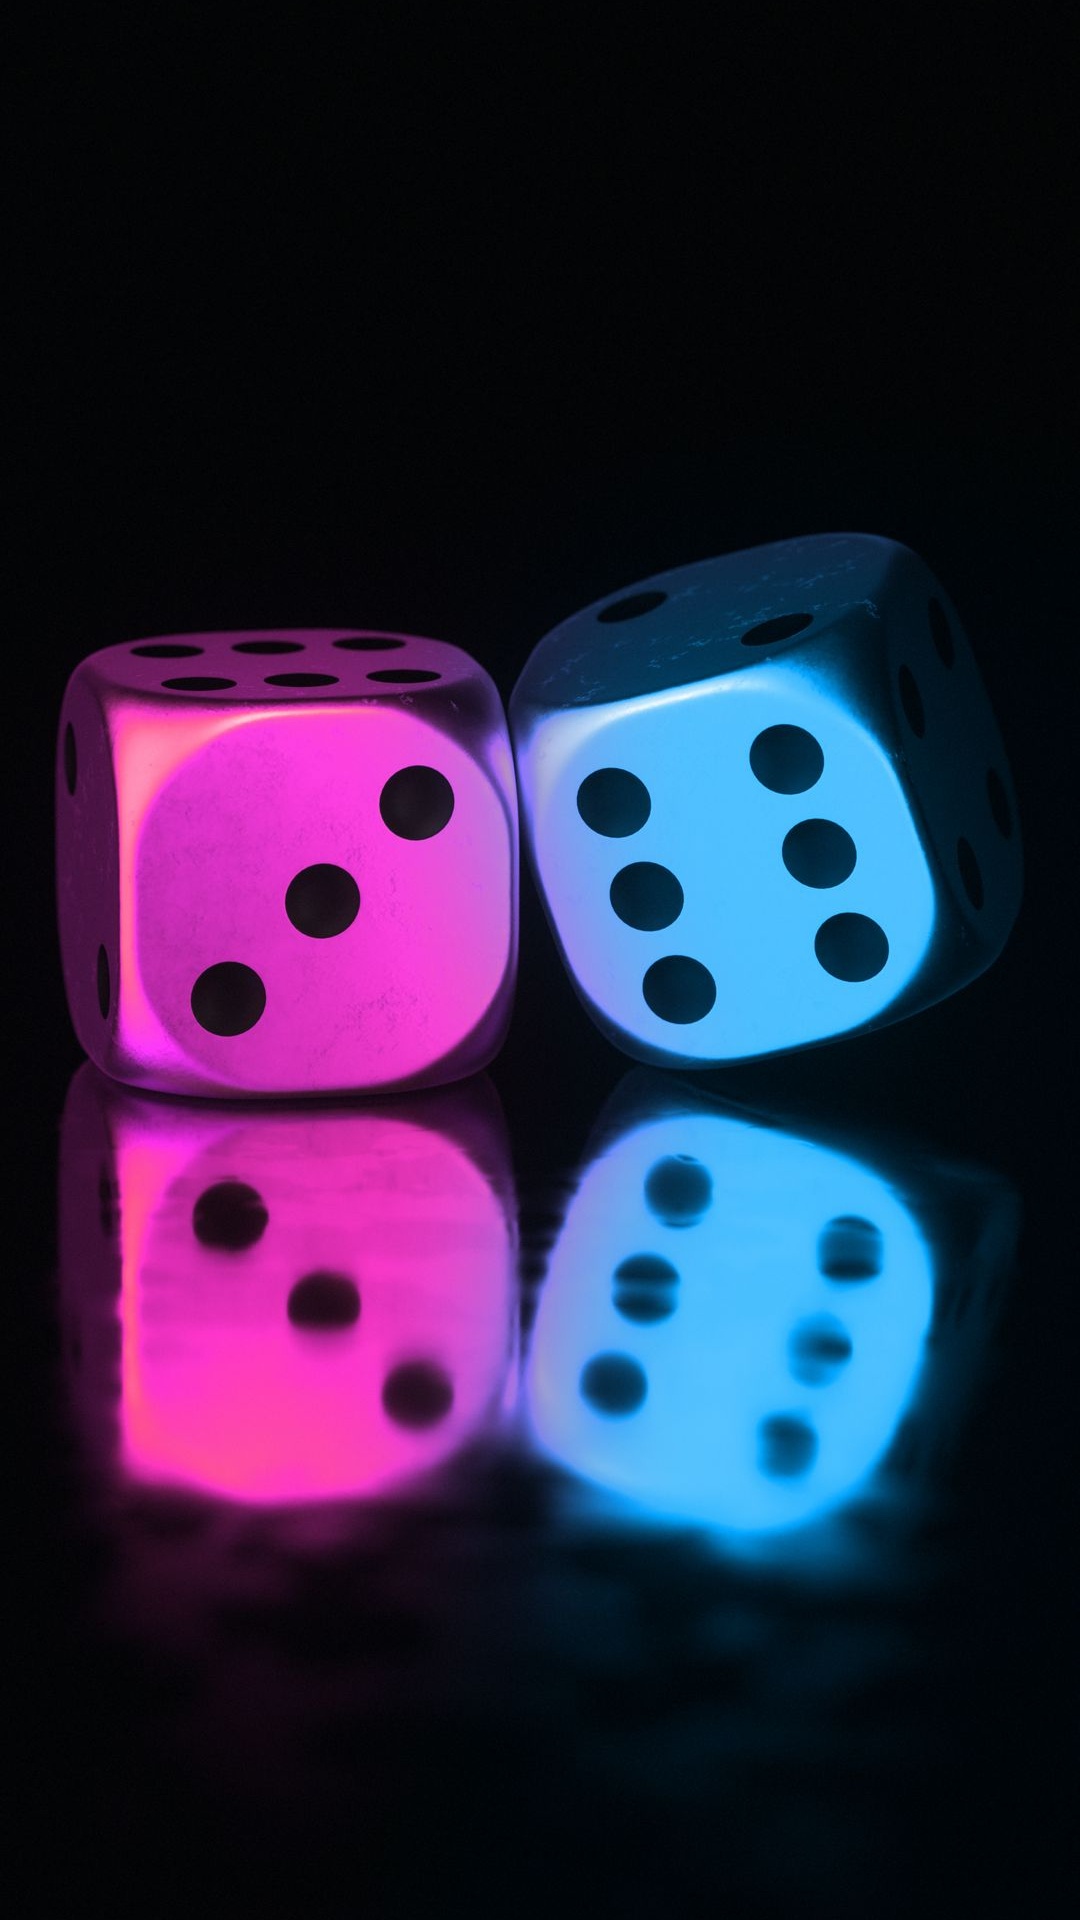 Dice Game, Dice, White, Pattern, Indoor Games and Sports. Wallpaper in 1080x1920 Resolution